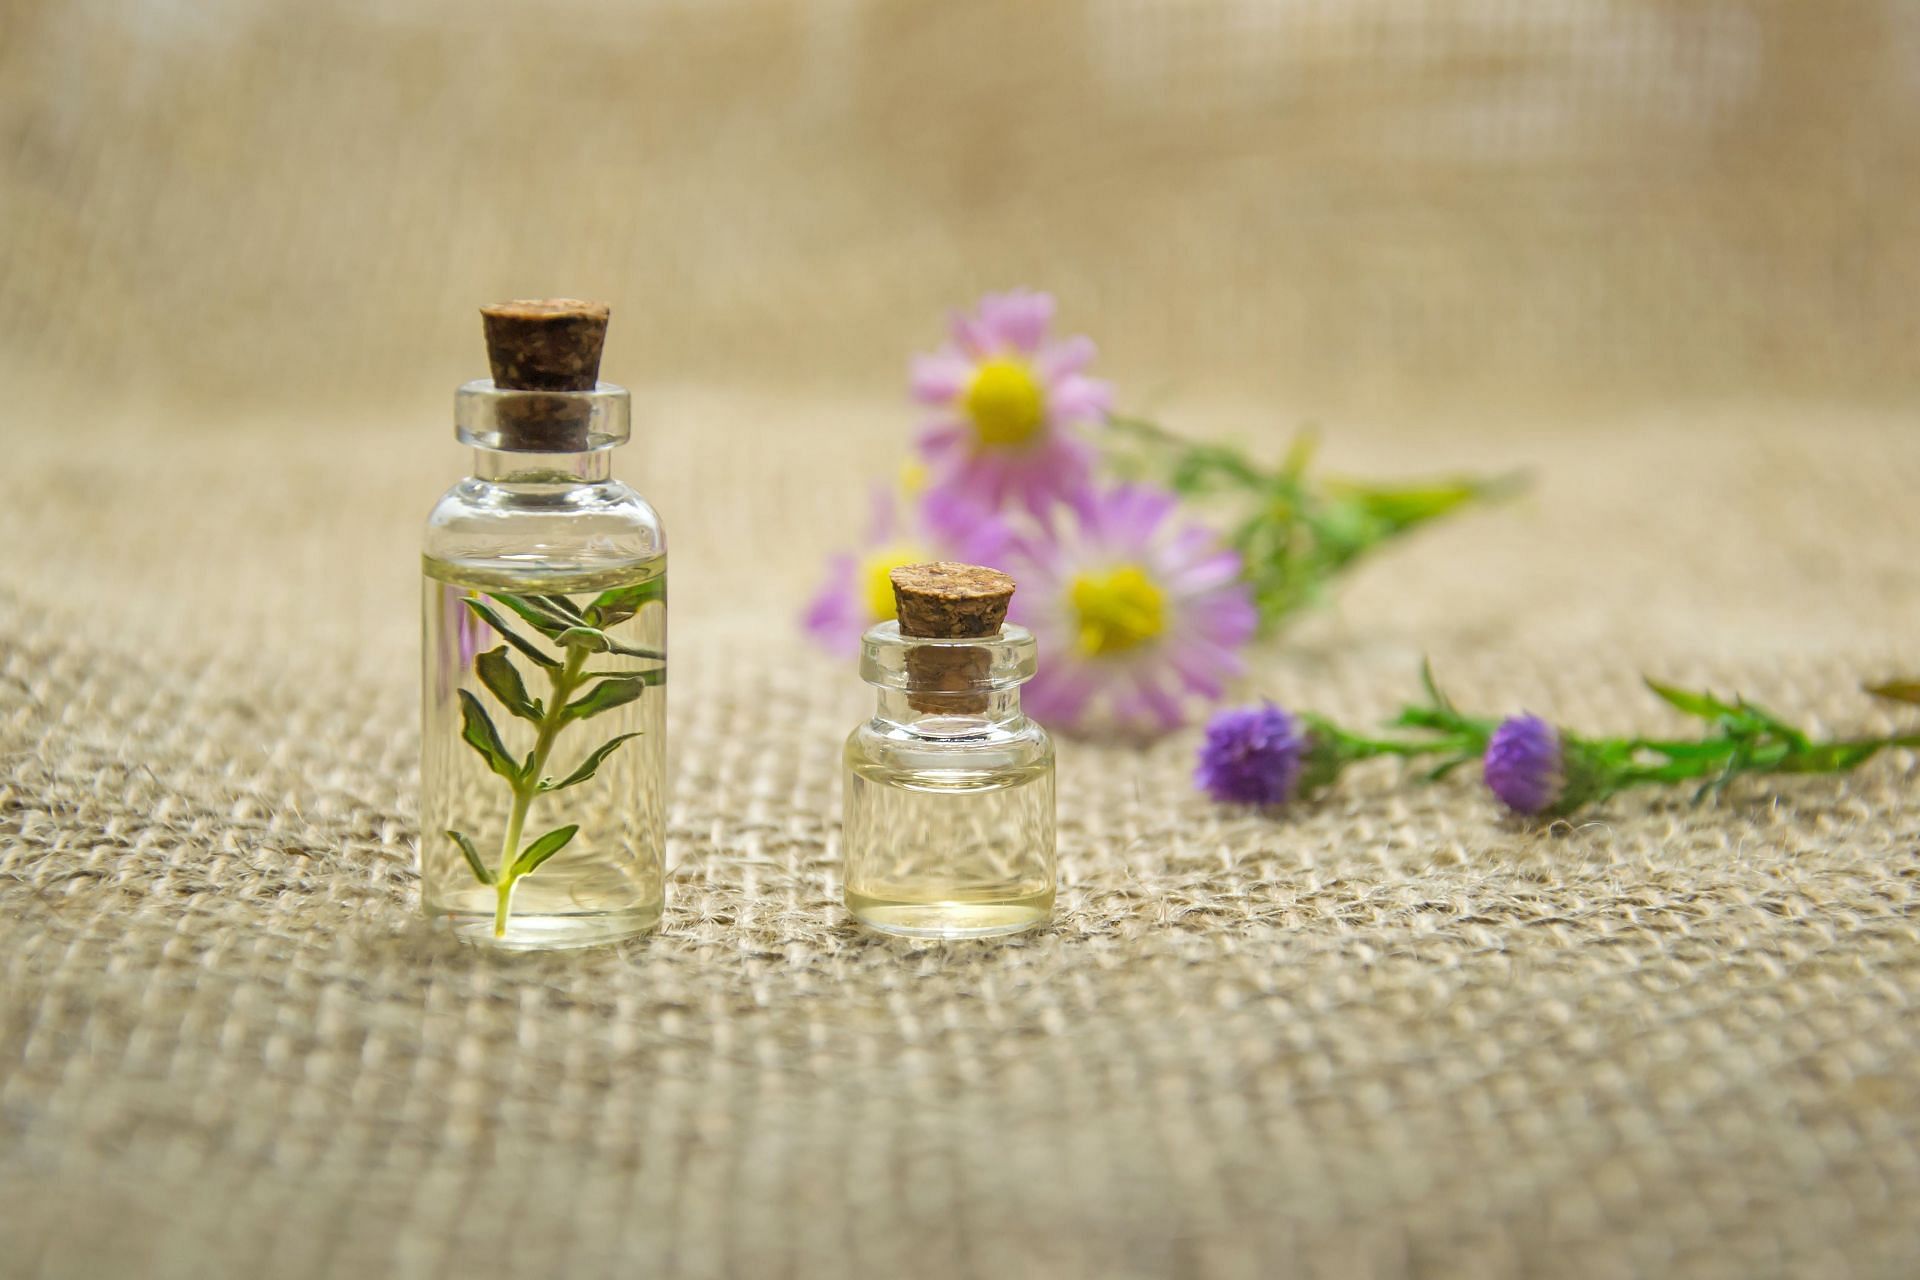 8 natural remedies for asthma (image sourced via Pexels / Photo by mereefe)